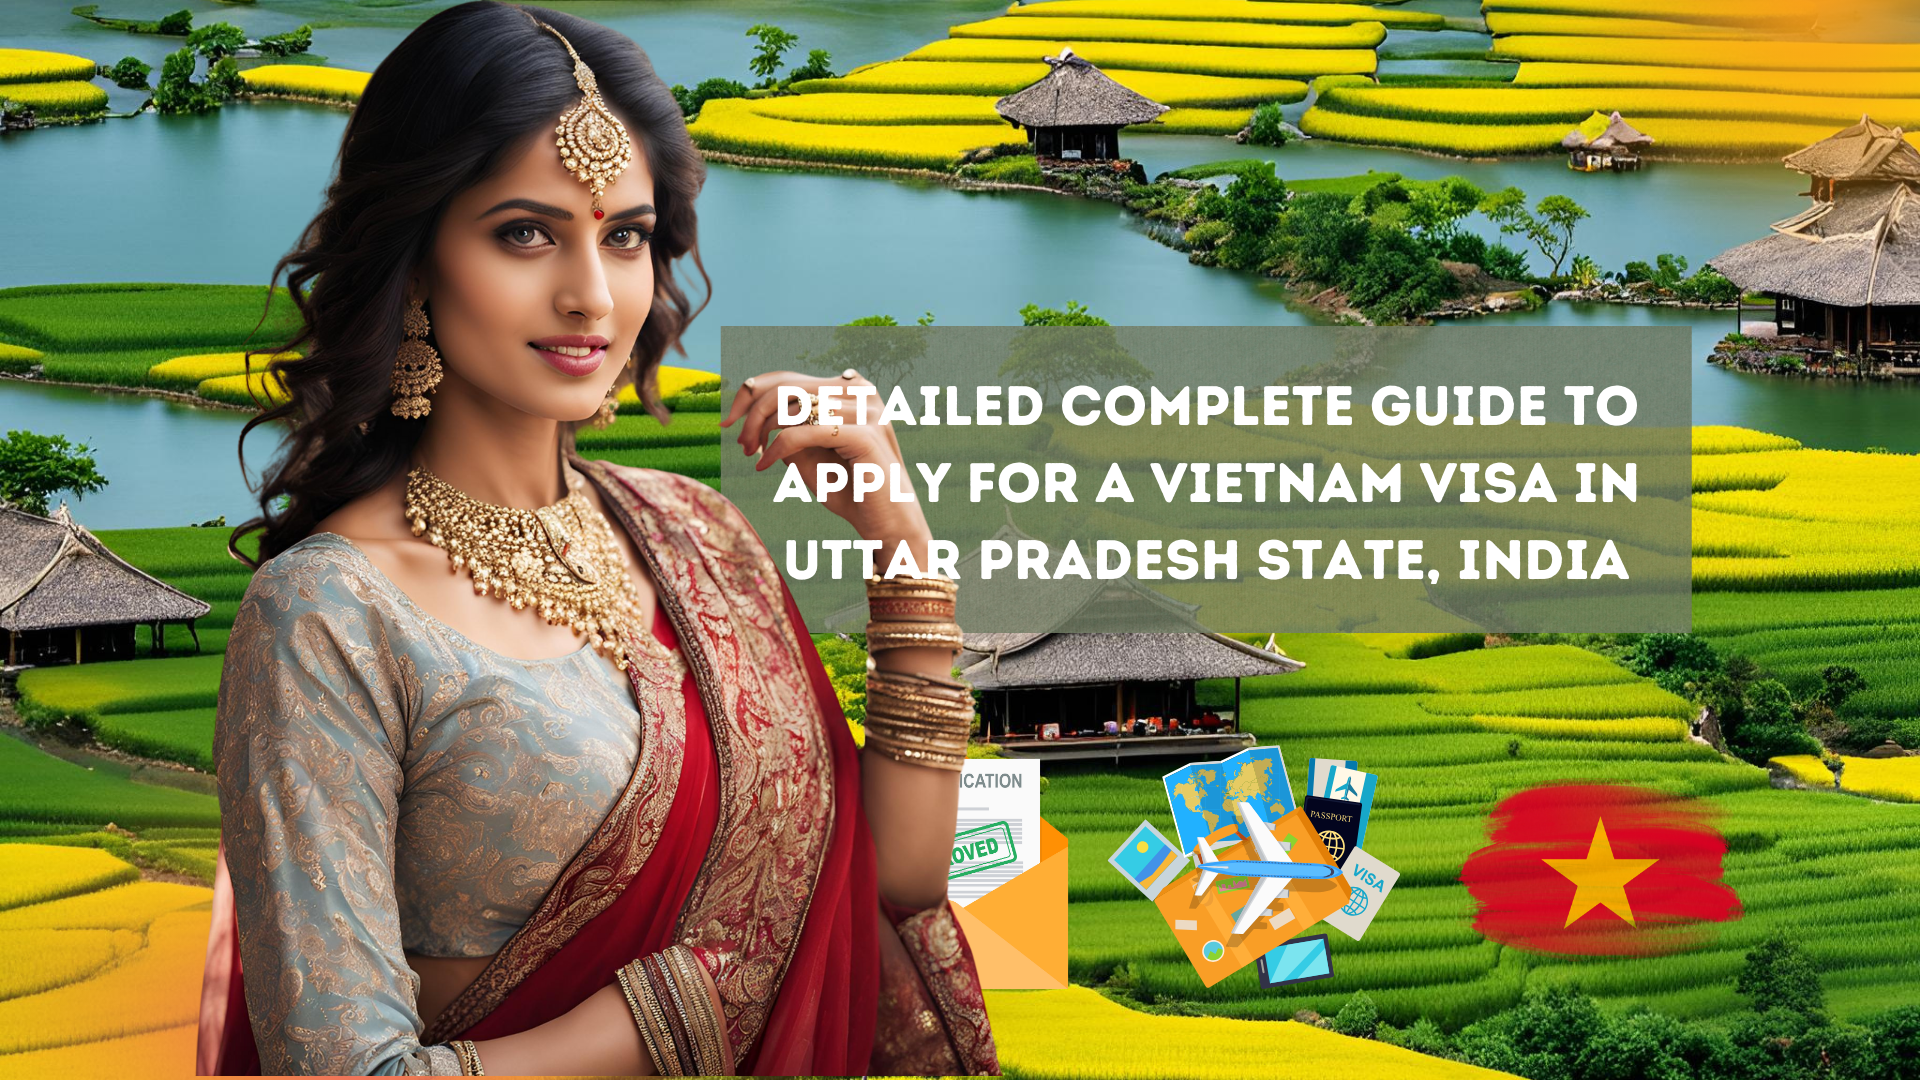 Detailed Complete Guide to Apply for a Vietnam Visa in Uttar Pradesh State, India